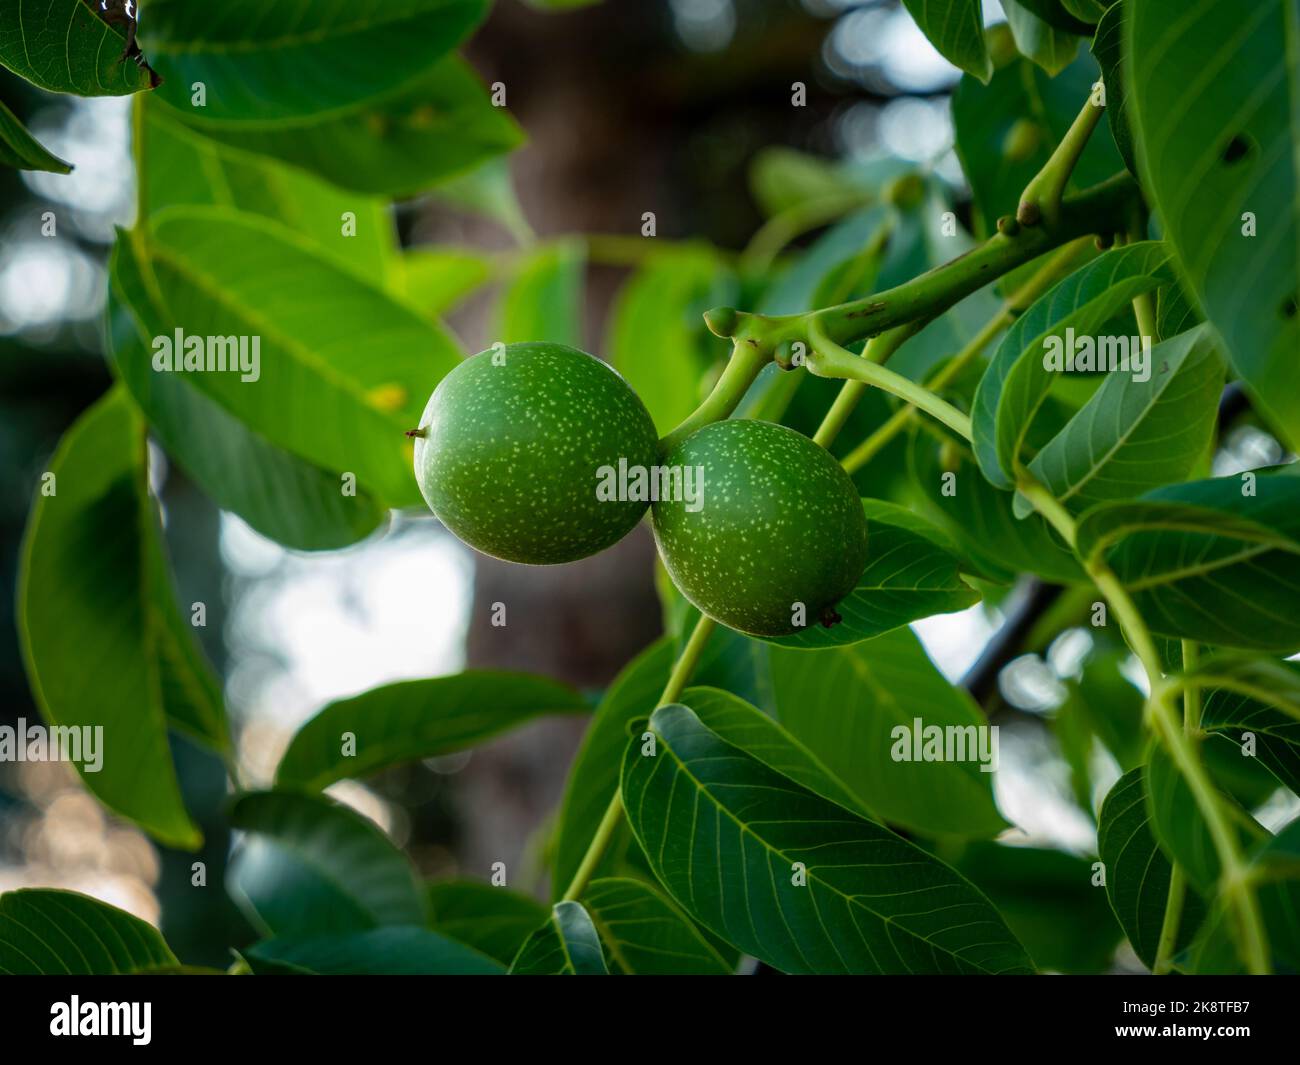 Unripe walnuts on a tree. Close-up of green walnut fruits next to lush green leaves. A twig with two growing nuts is in a garden. The shell is dotted. Stock Photo